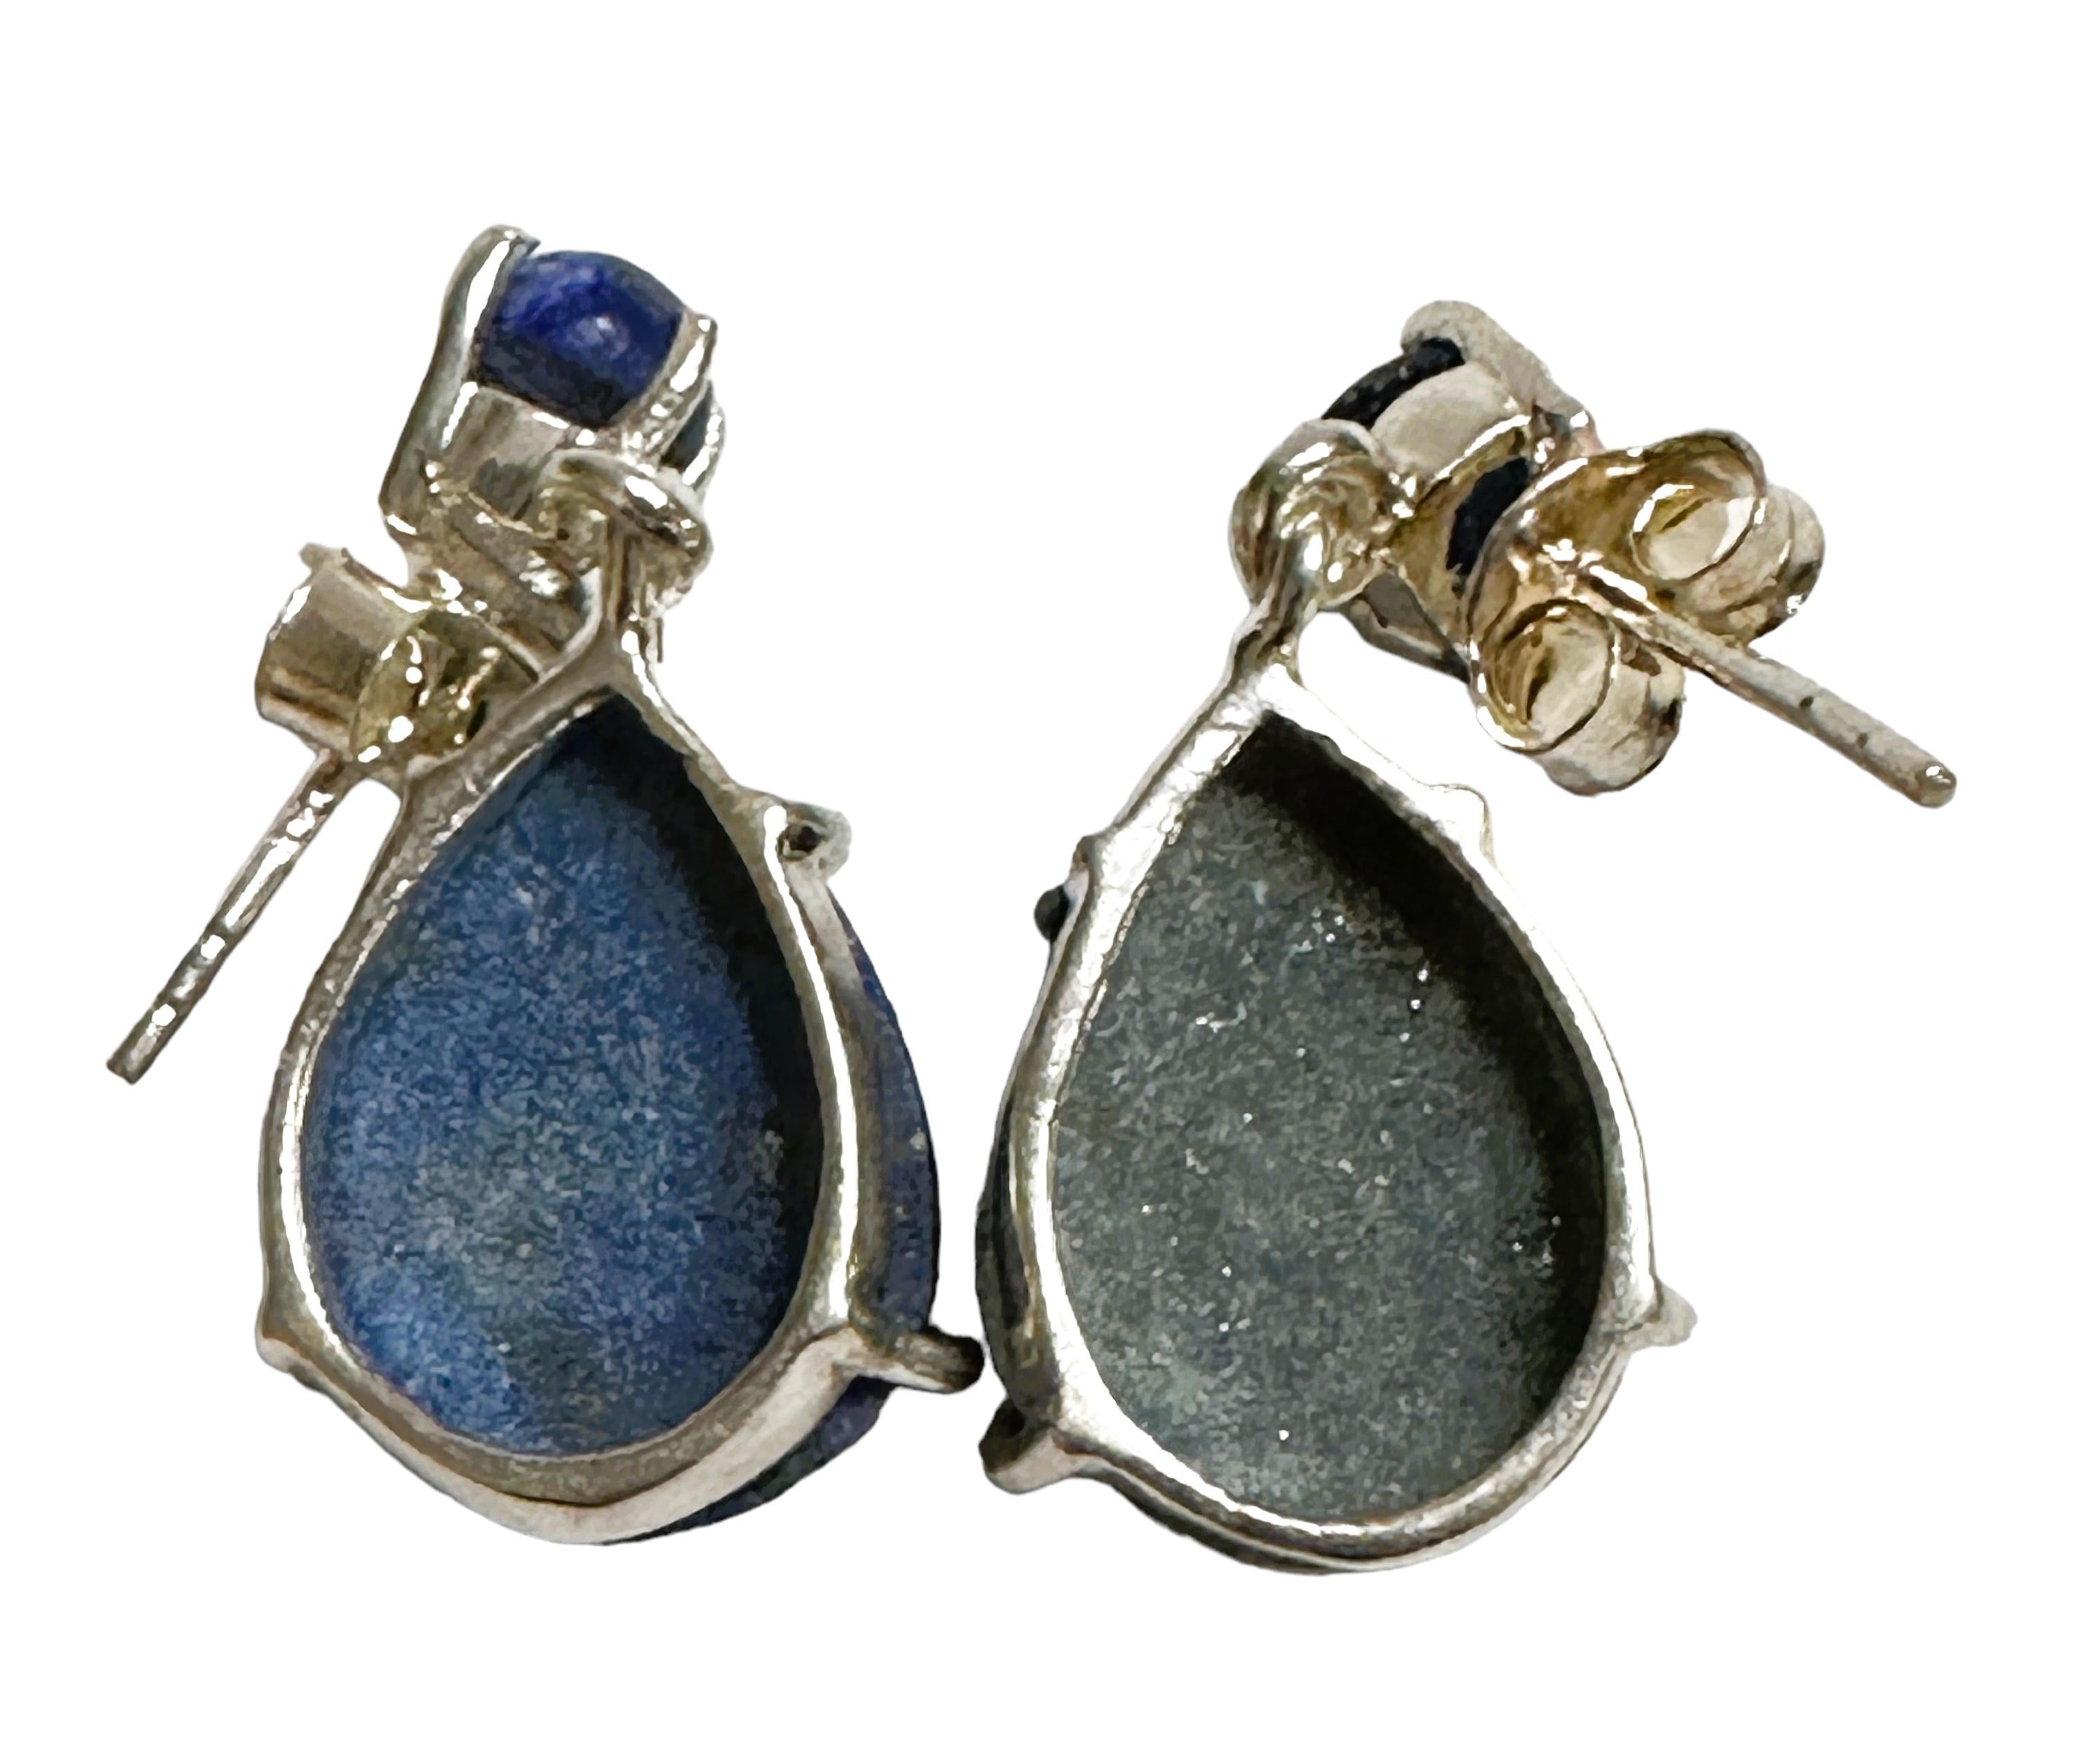 Blue Lapis Lazuli Sterling Silver Post Earrings In Excellent Condition For Sale In Eagan, MN